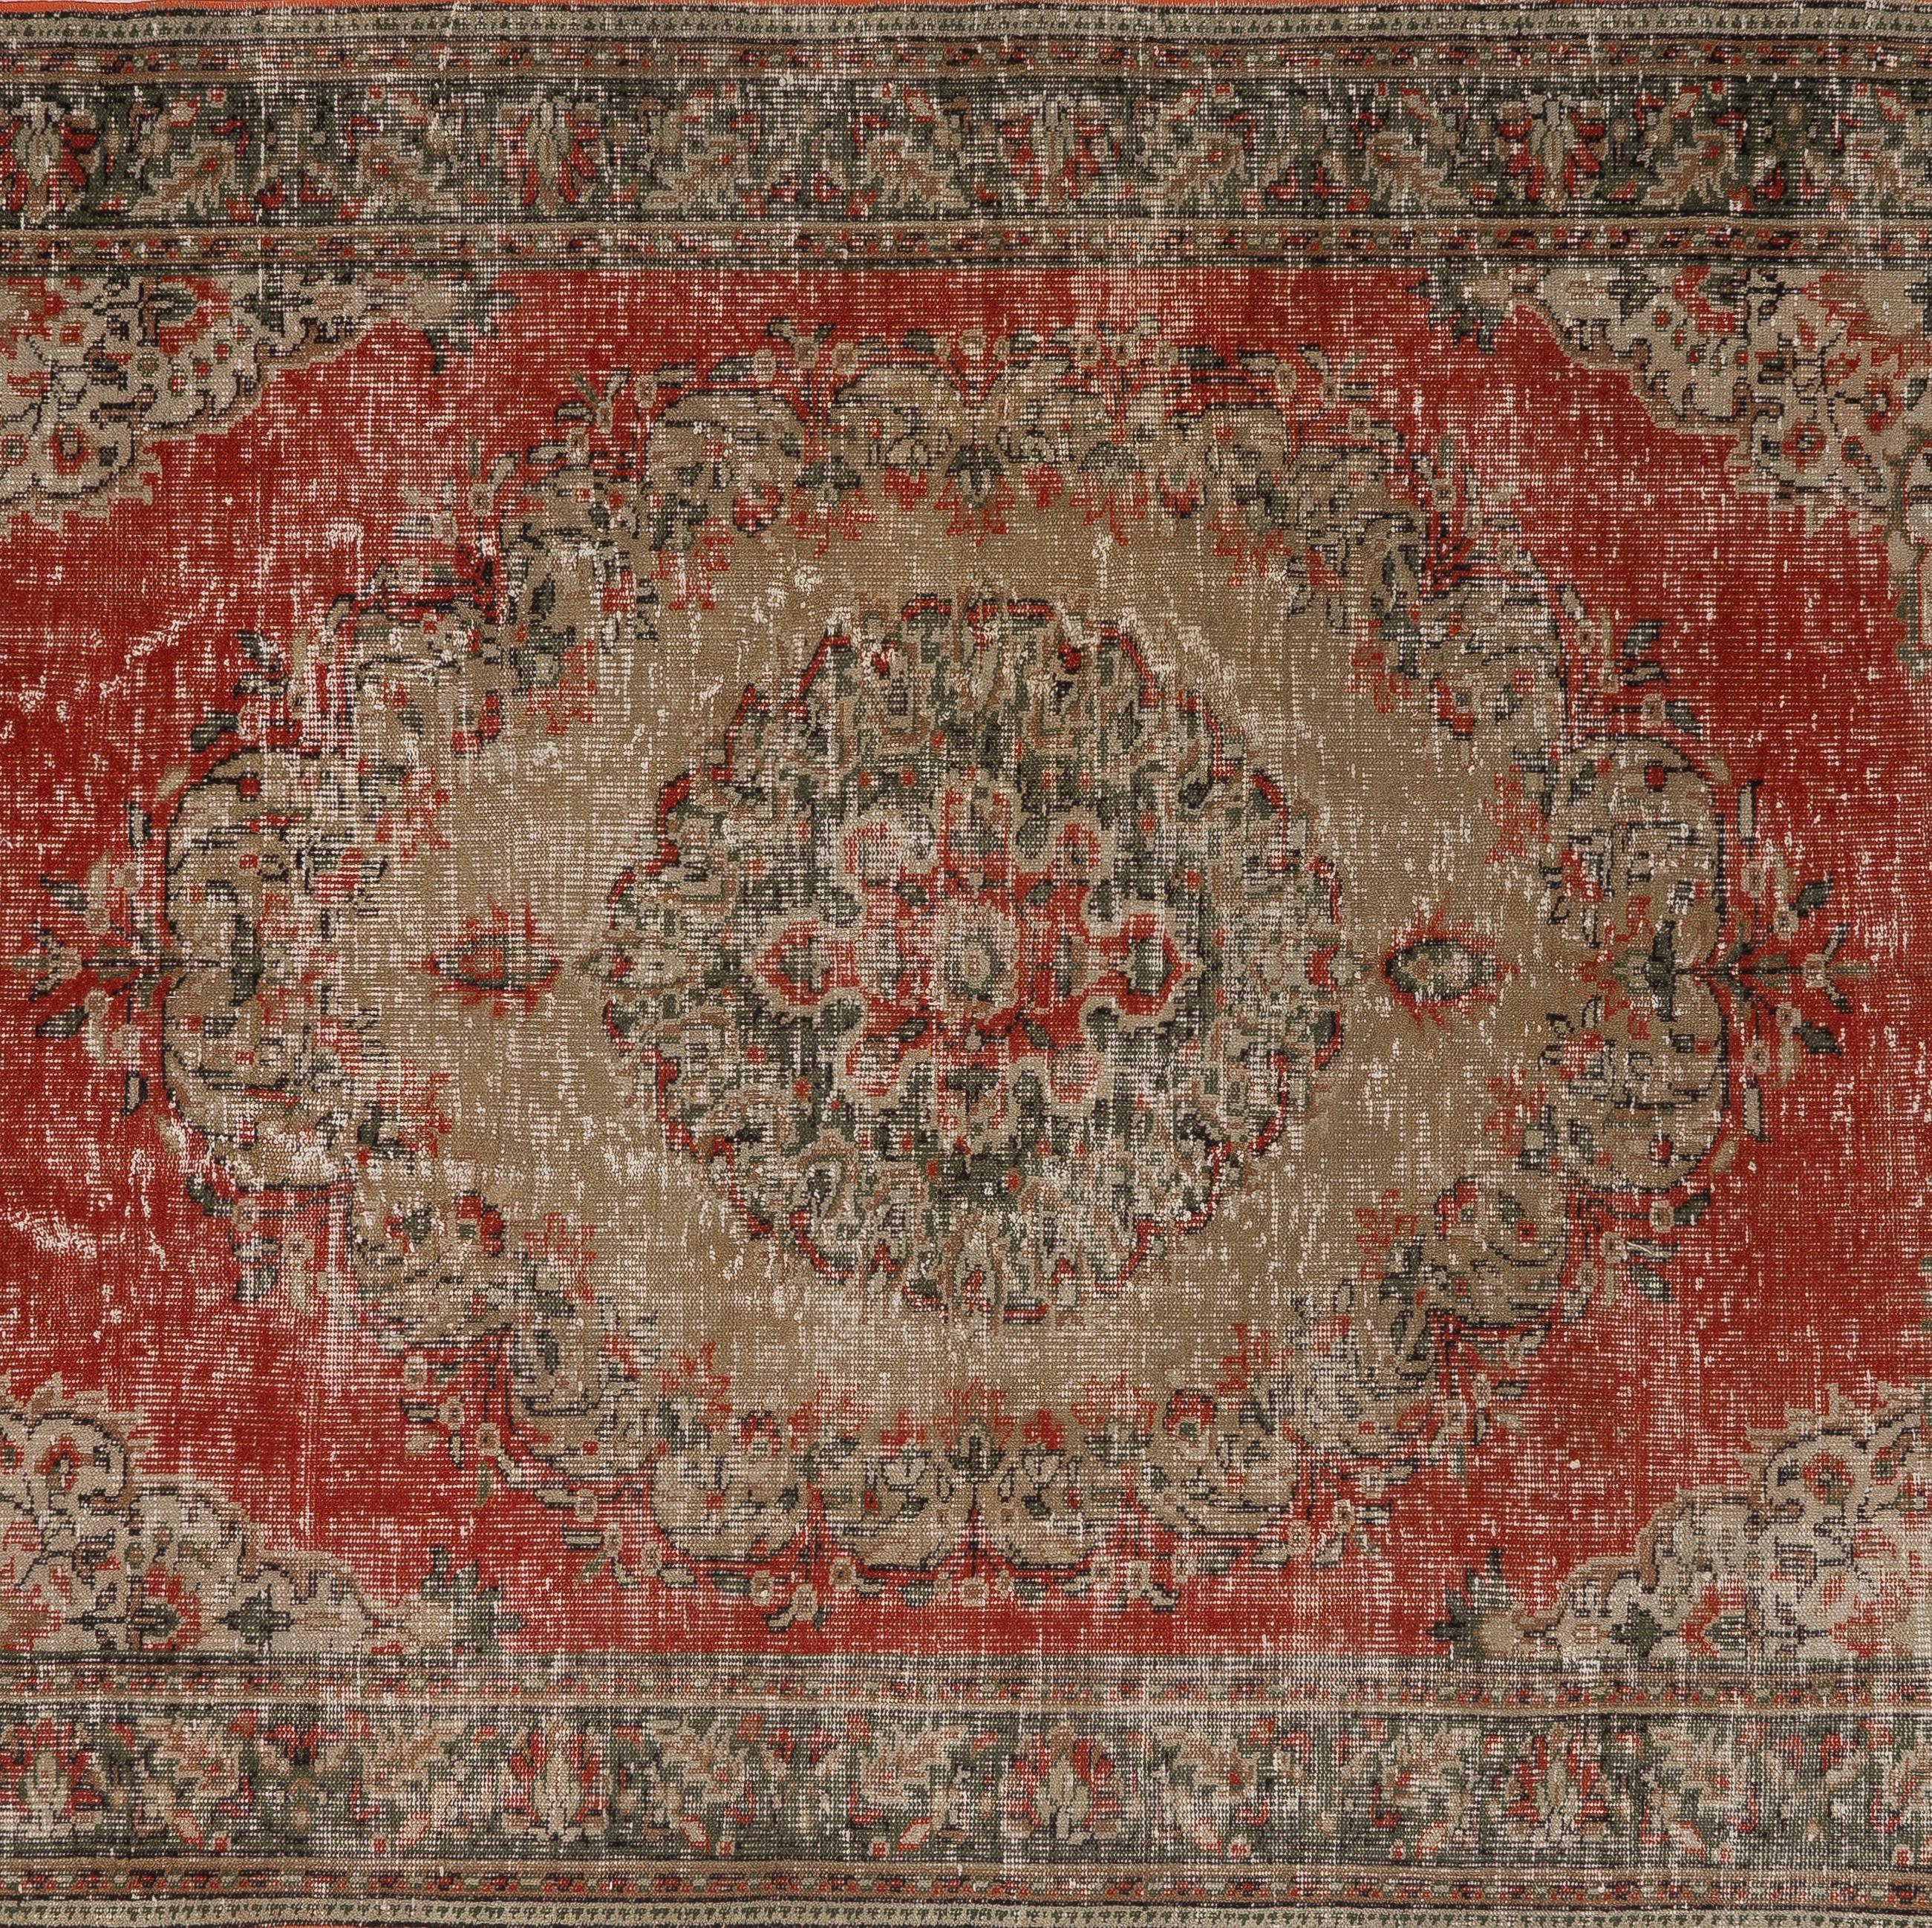 Hand-Knotted 6x9.5 ft Vintage Handmade Turkish Wool Rug in Red and Tan with Medallion Design For Sale